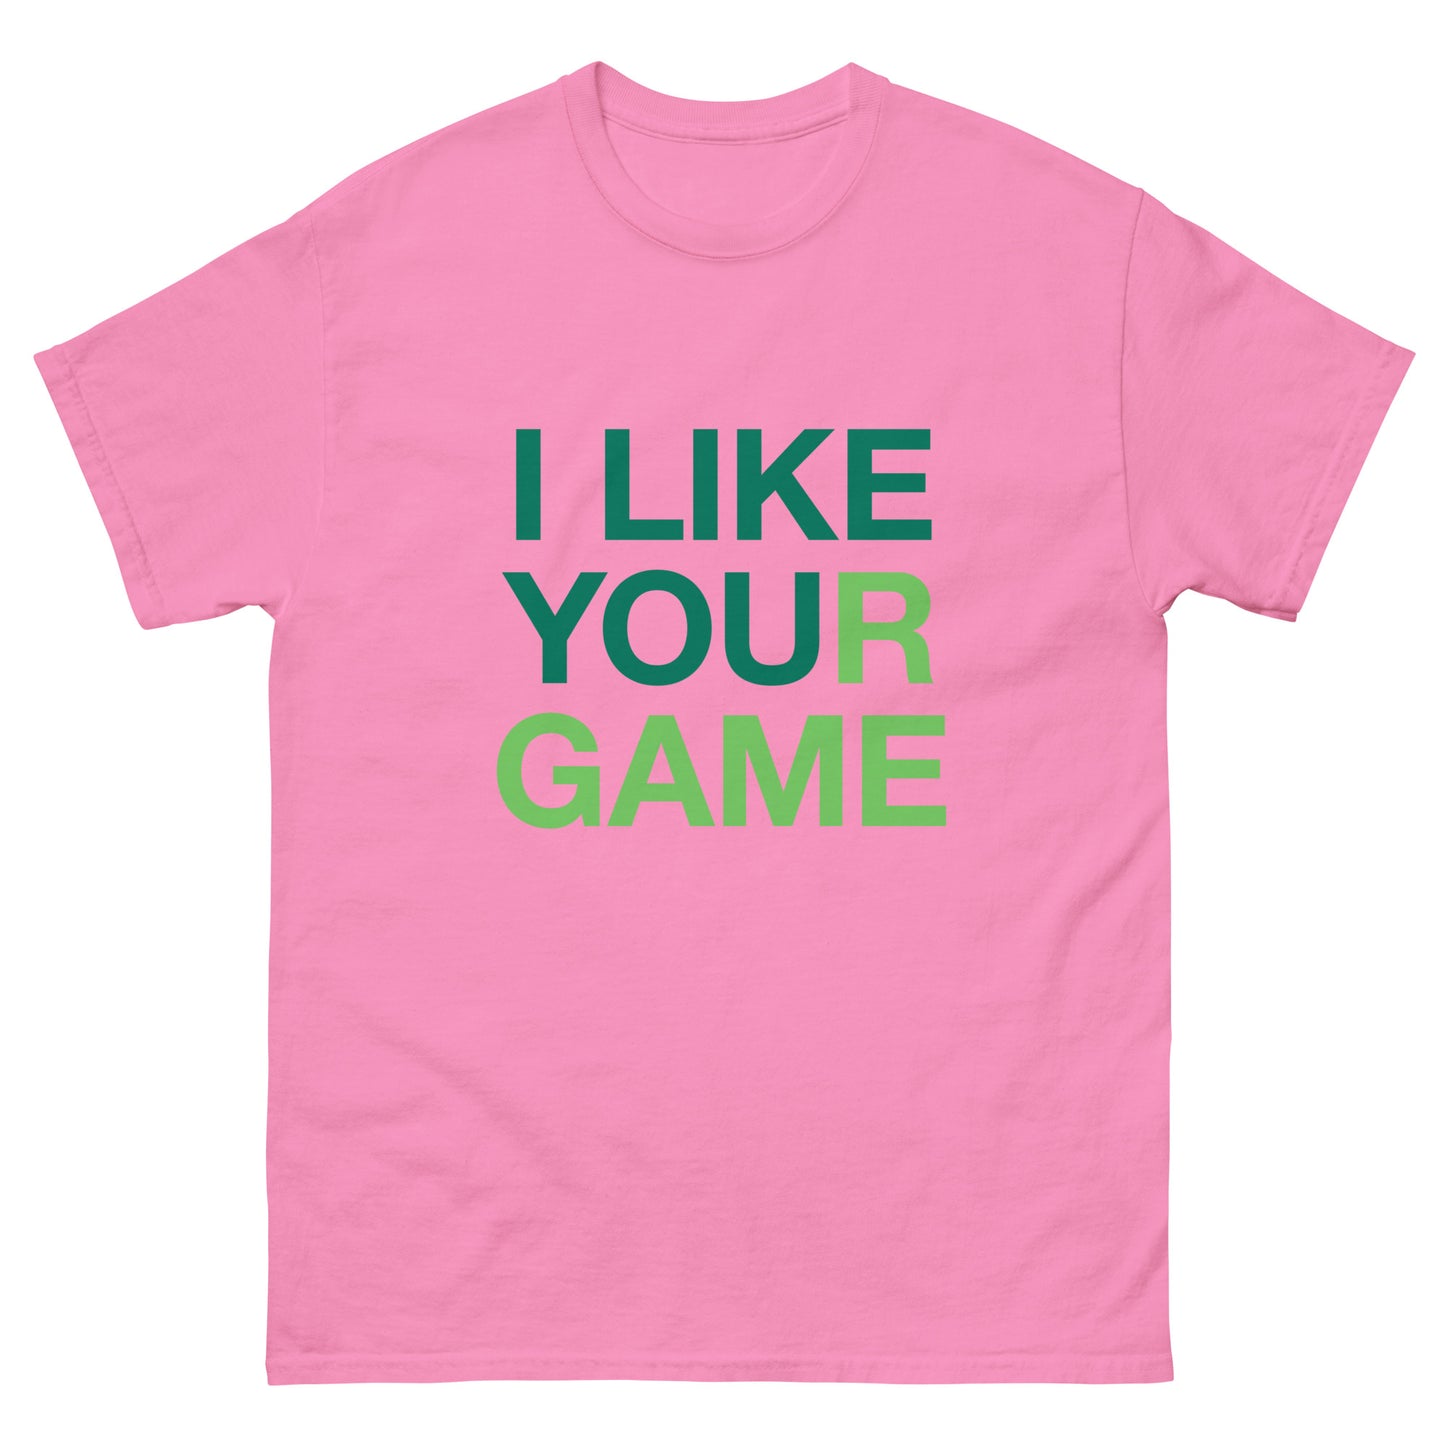 I LIKE YOUR GAME Men's classic tee